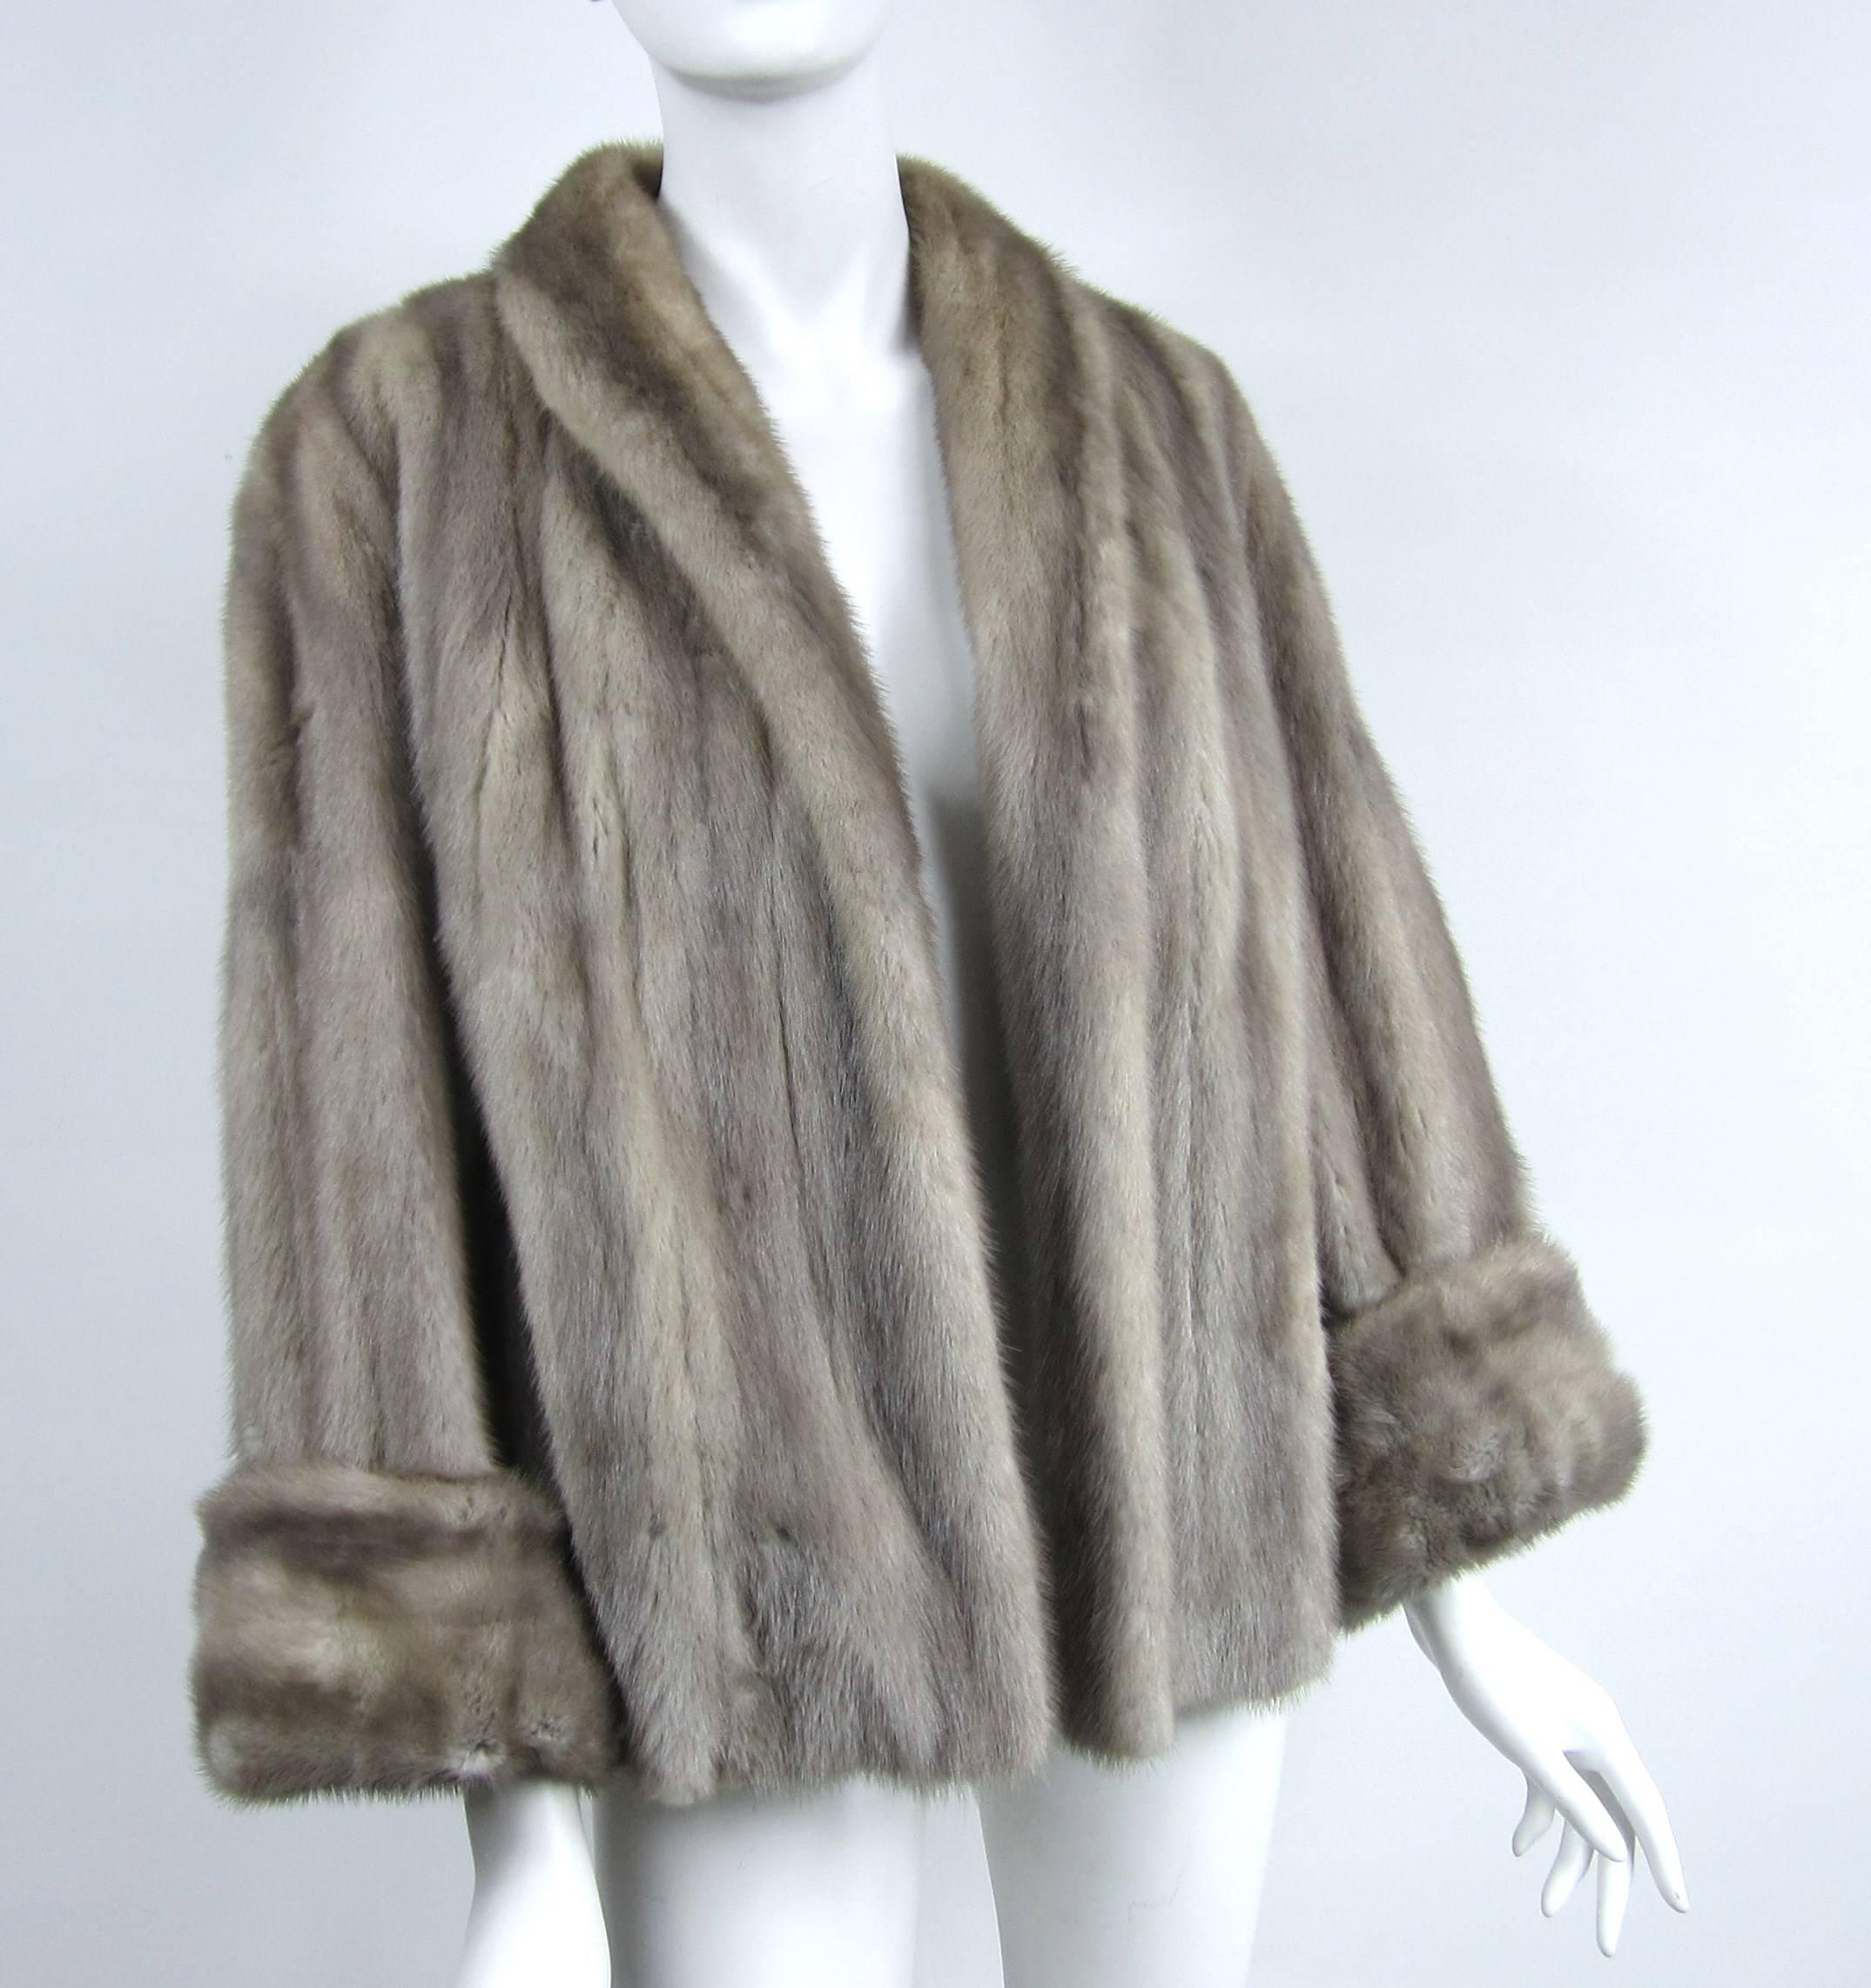 Stunning color on this Mink Jacket. Stunning large cuffs on this one, which can be worn down as well 
Measuring 
Up to 42 inch on the bust 
Open waist 
Sleeve 22 inches 
Sleeve cuff 4 inch 
down the back length is 25-1/4 
Any questions please call,